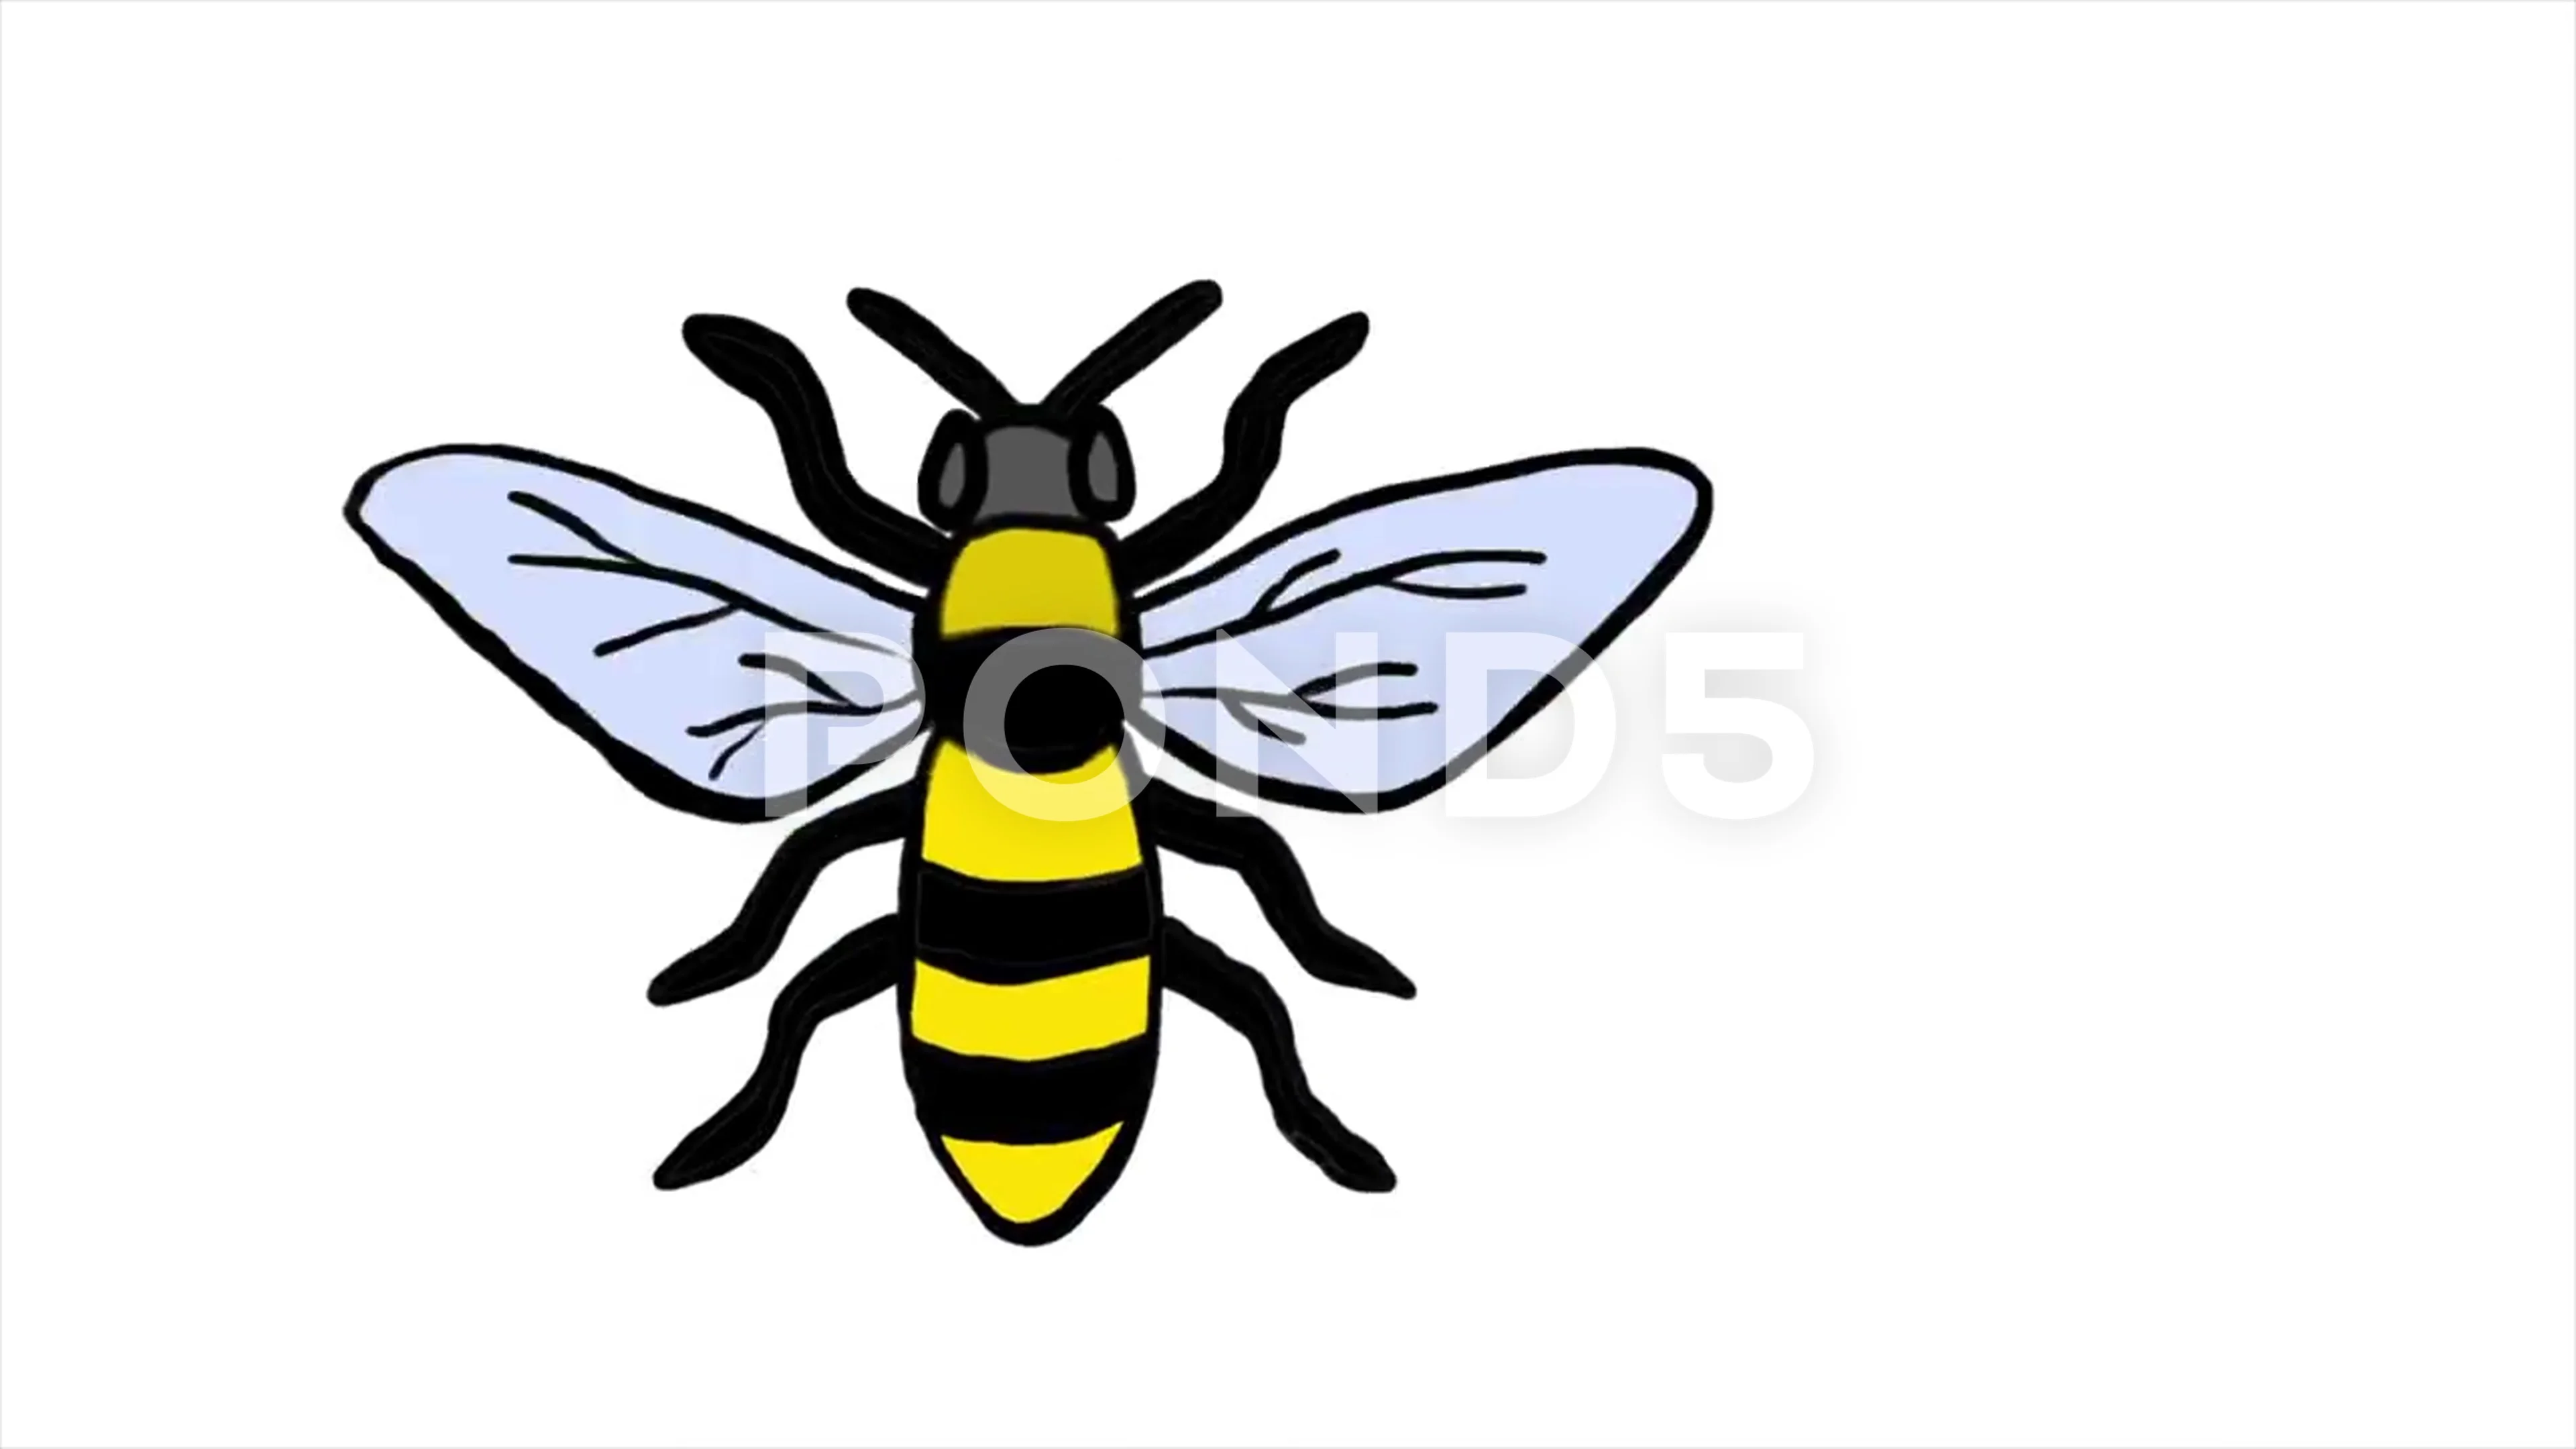 Honey Bee Doodle Animation Loop Over Whi... | Stock Video | Pond5